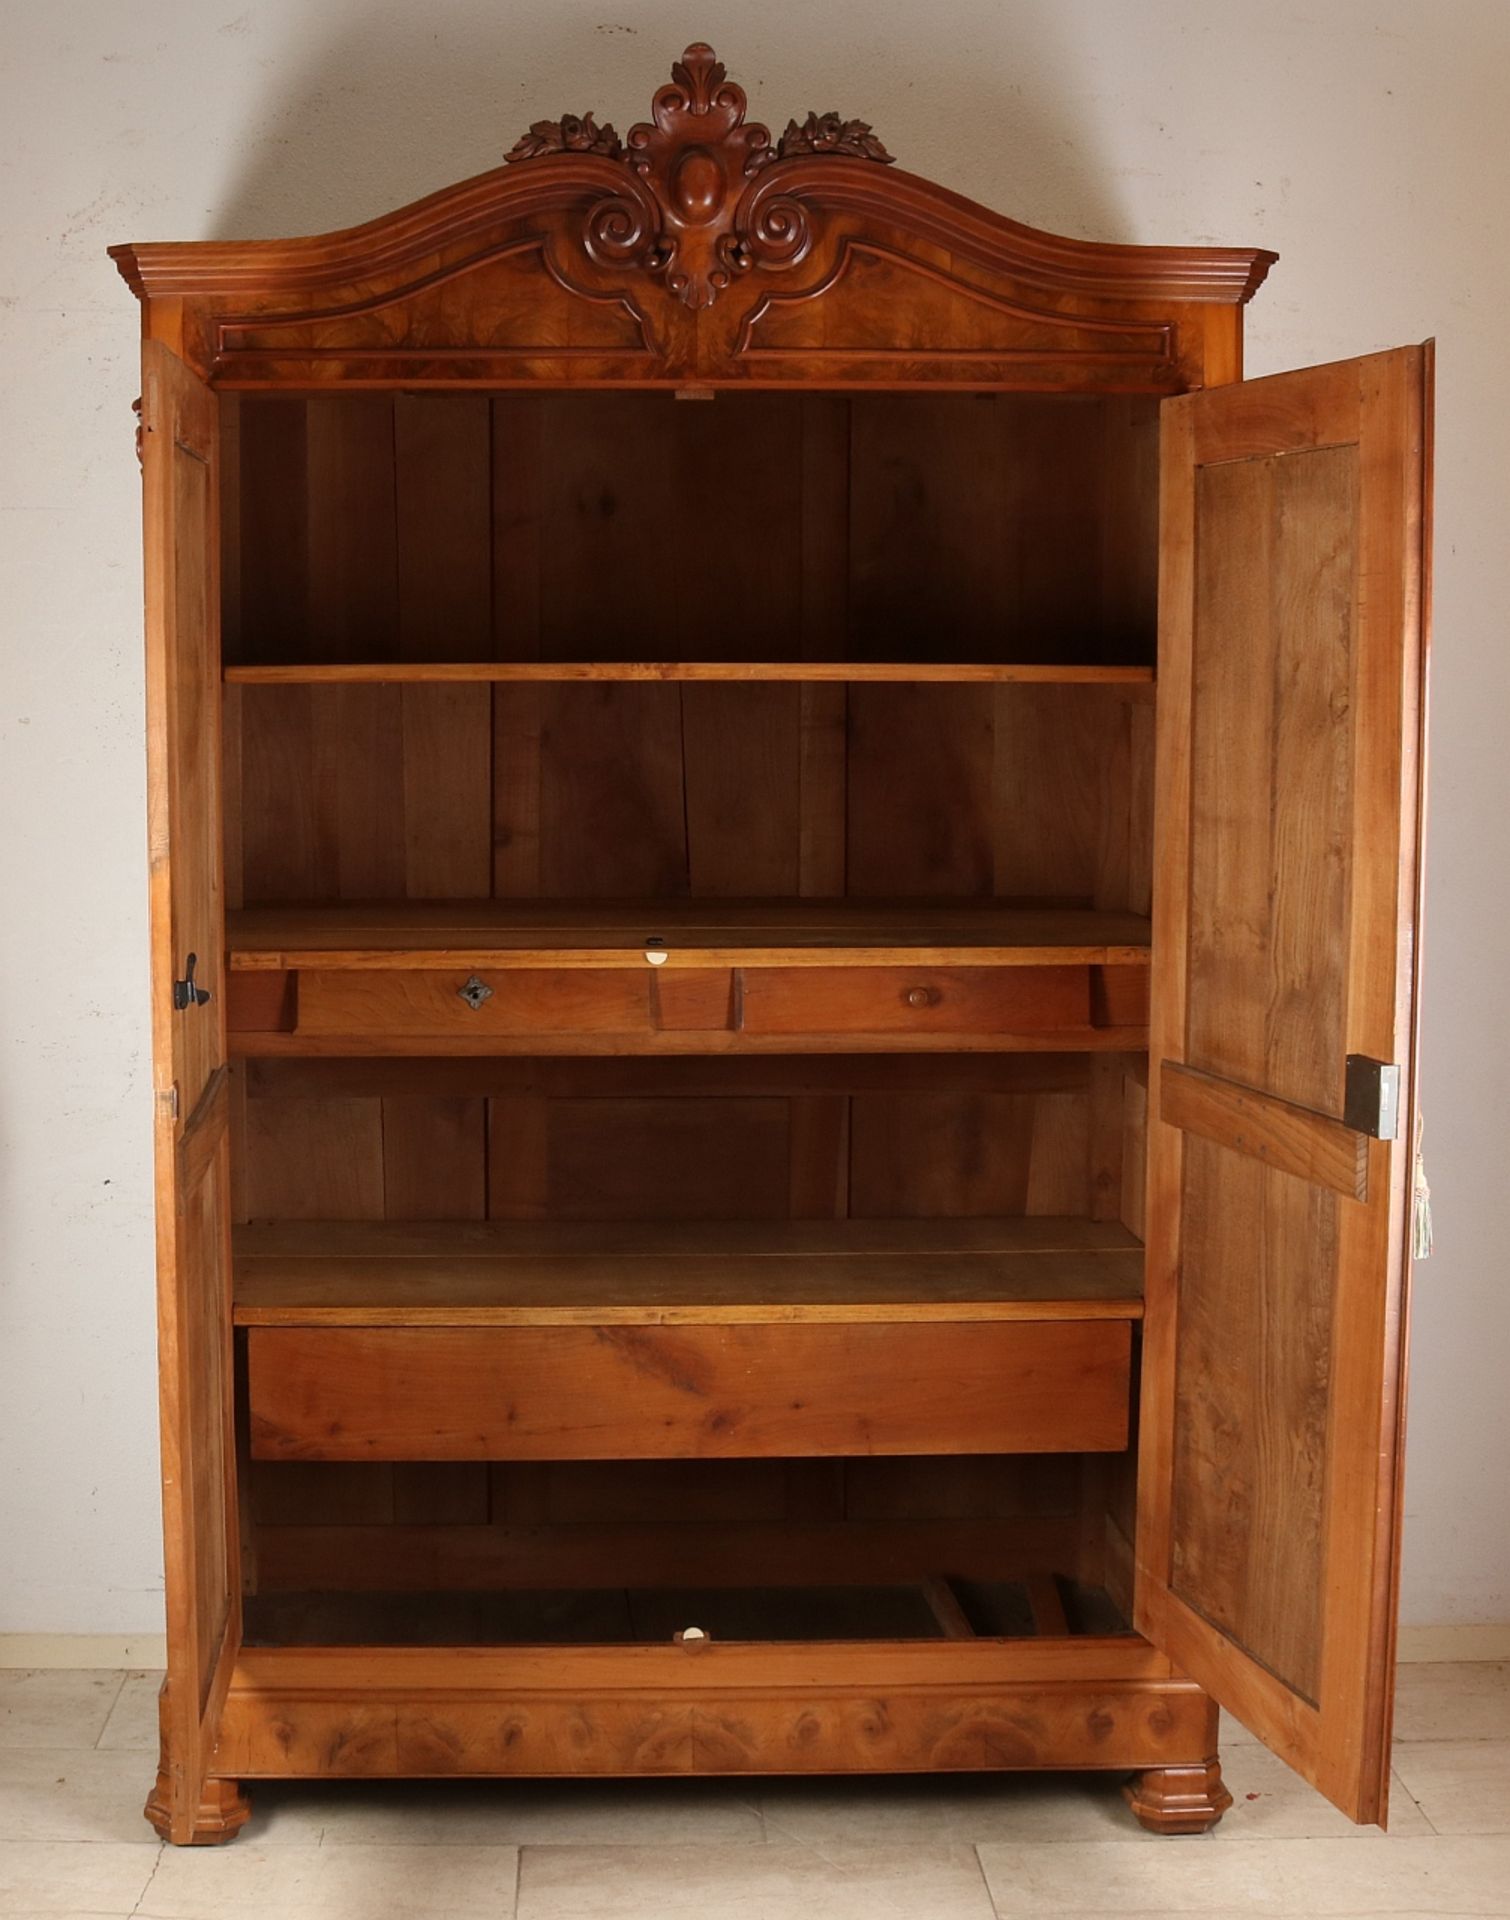 French cherry wood linen closet - Image 2 of 2